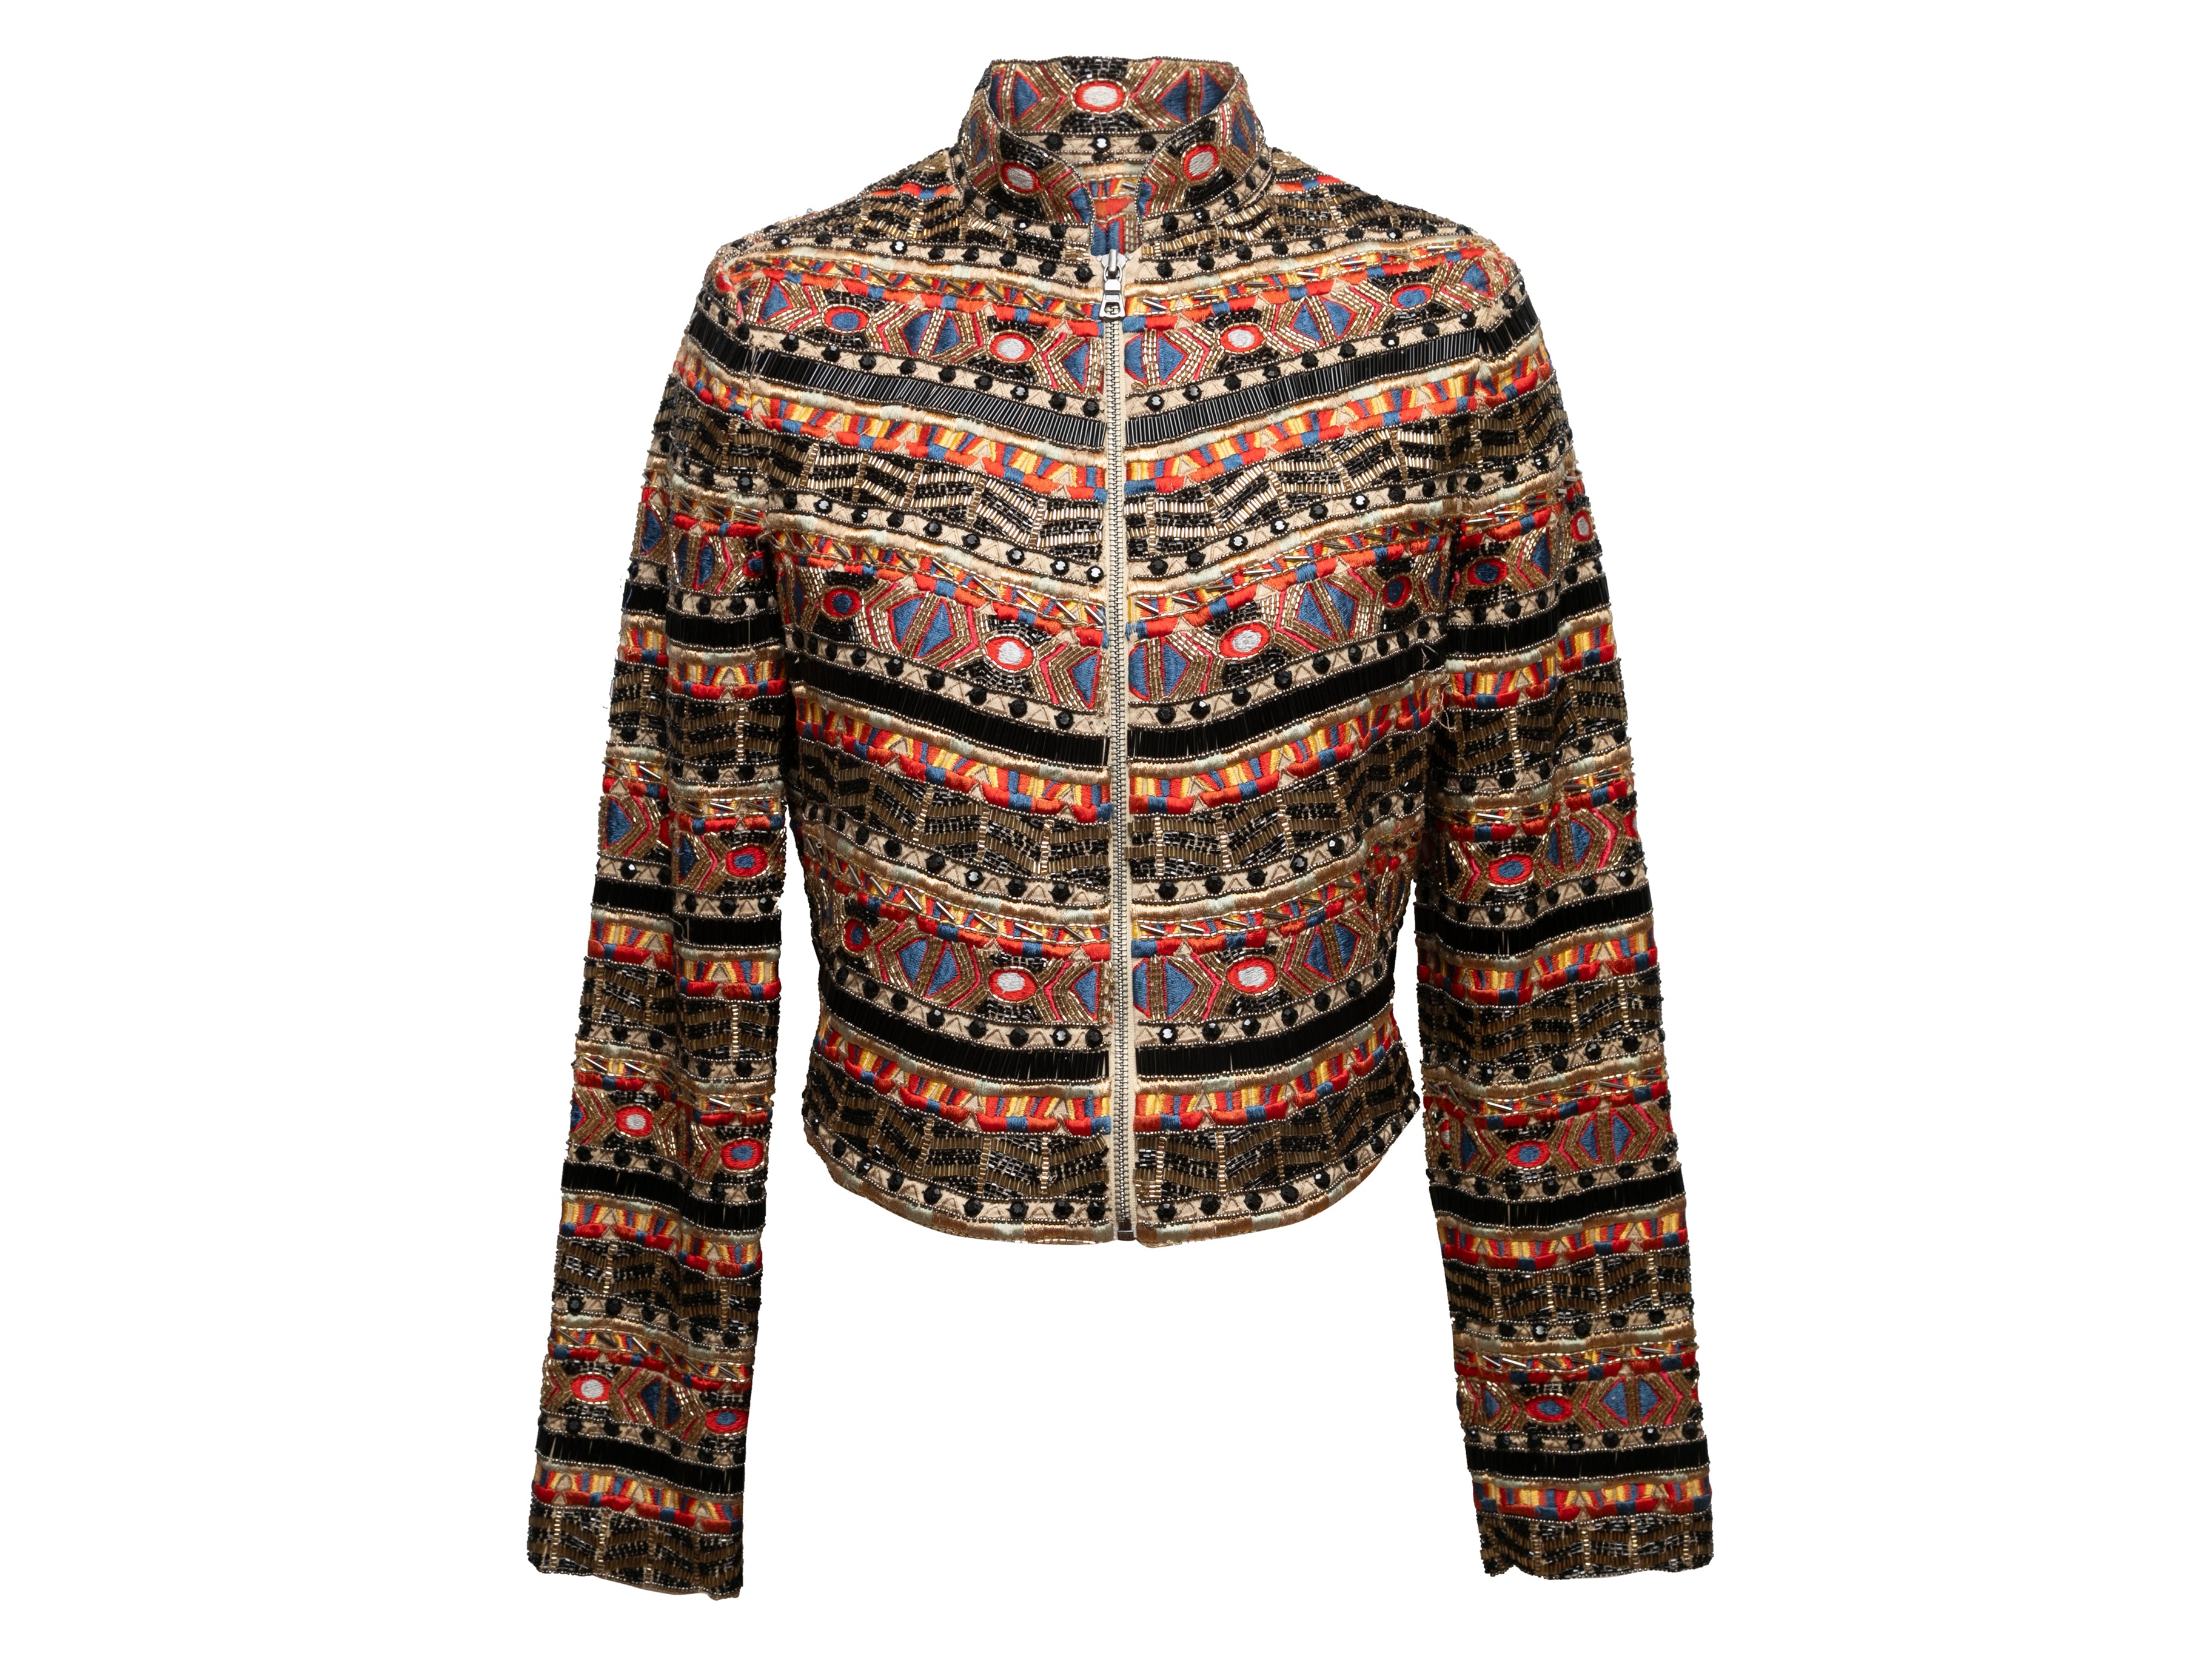 Tan & Multicolor Embroidered Jacket Size US M